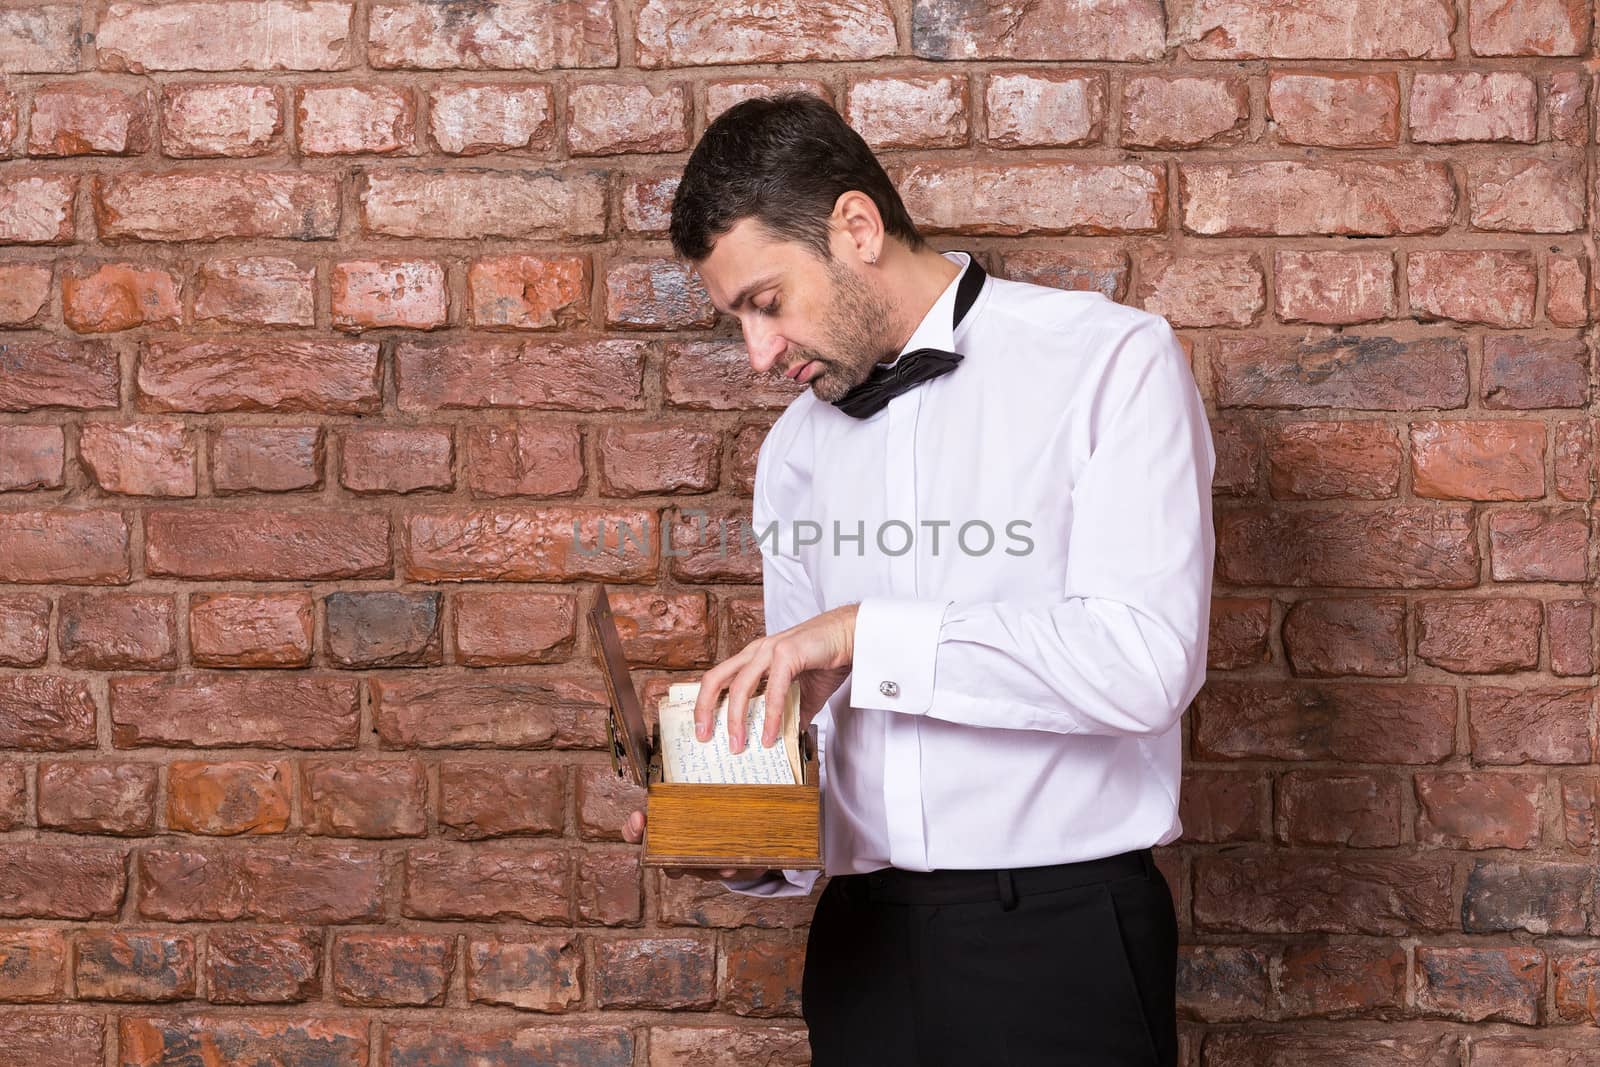 Man standing reading a old document from a wooden box which he is holding in his hand while standing in front of a brick wall